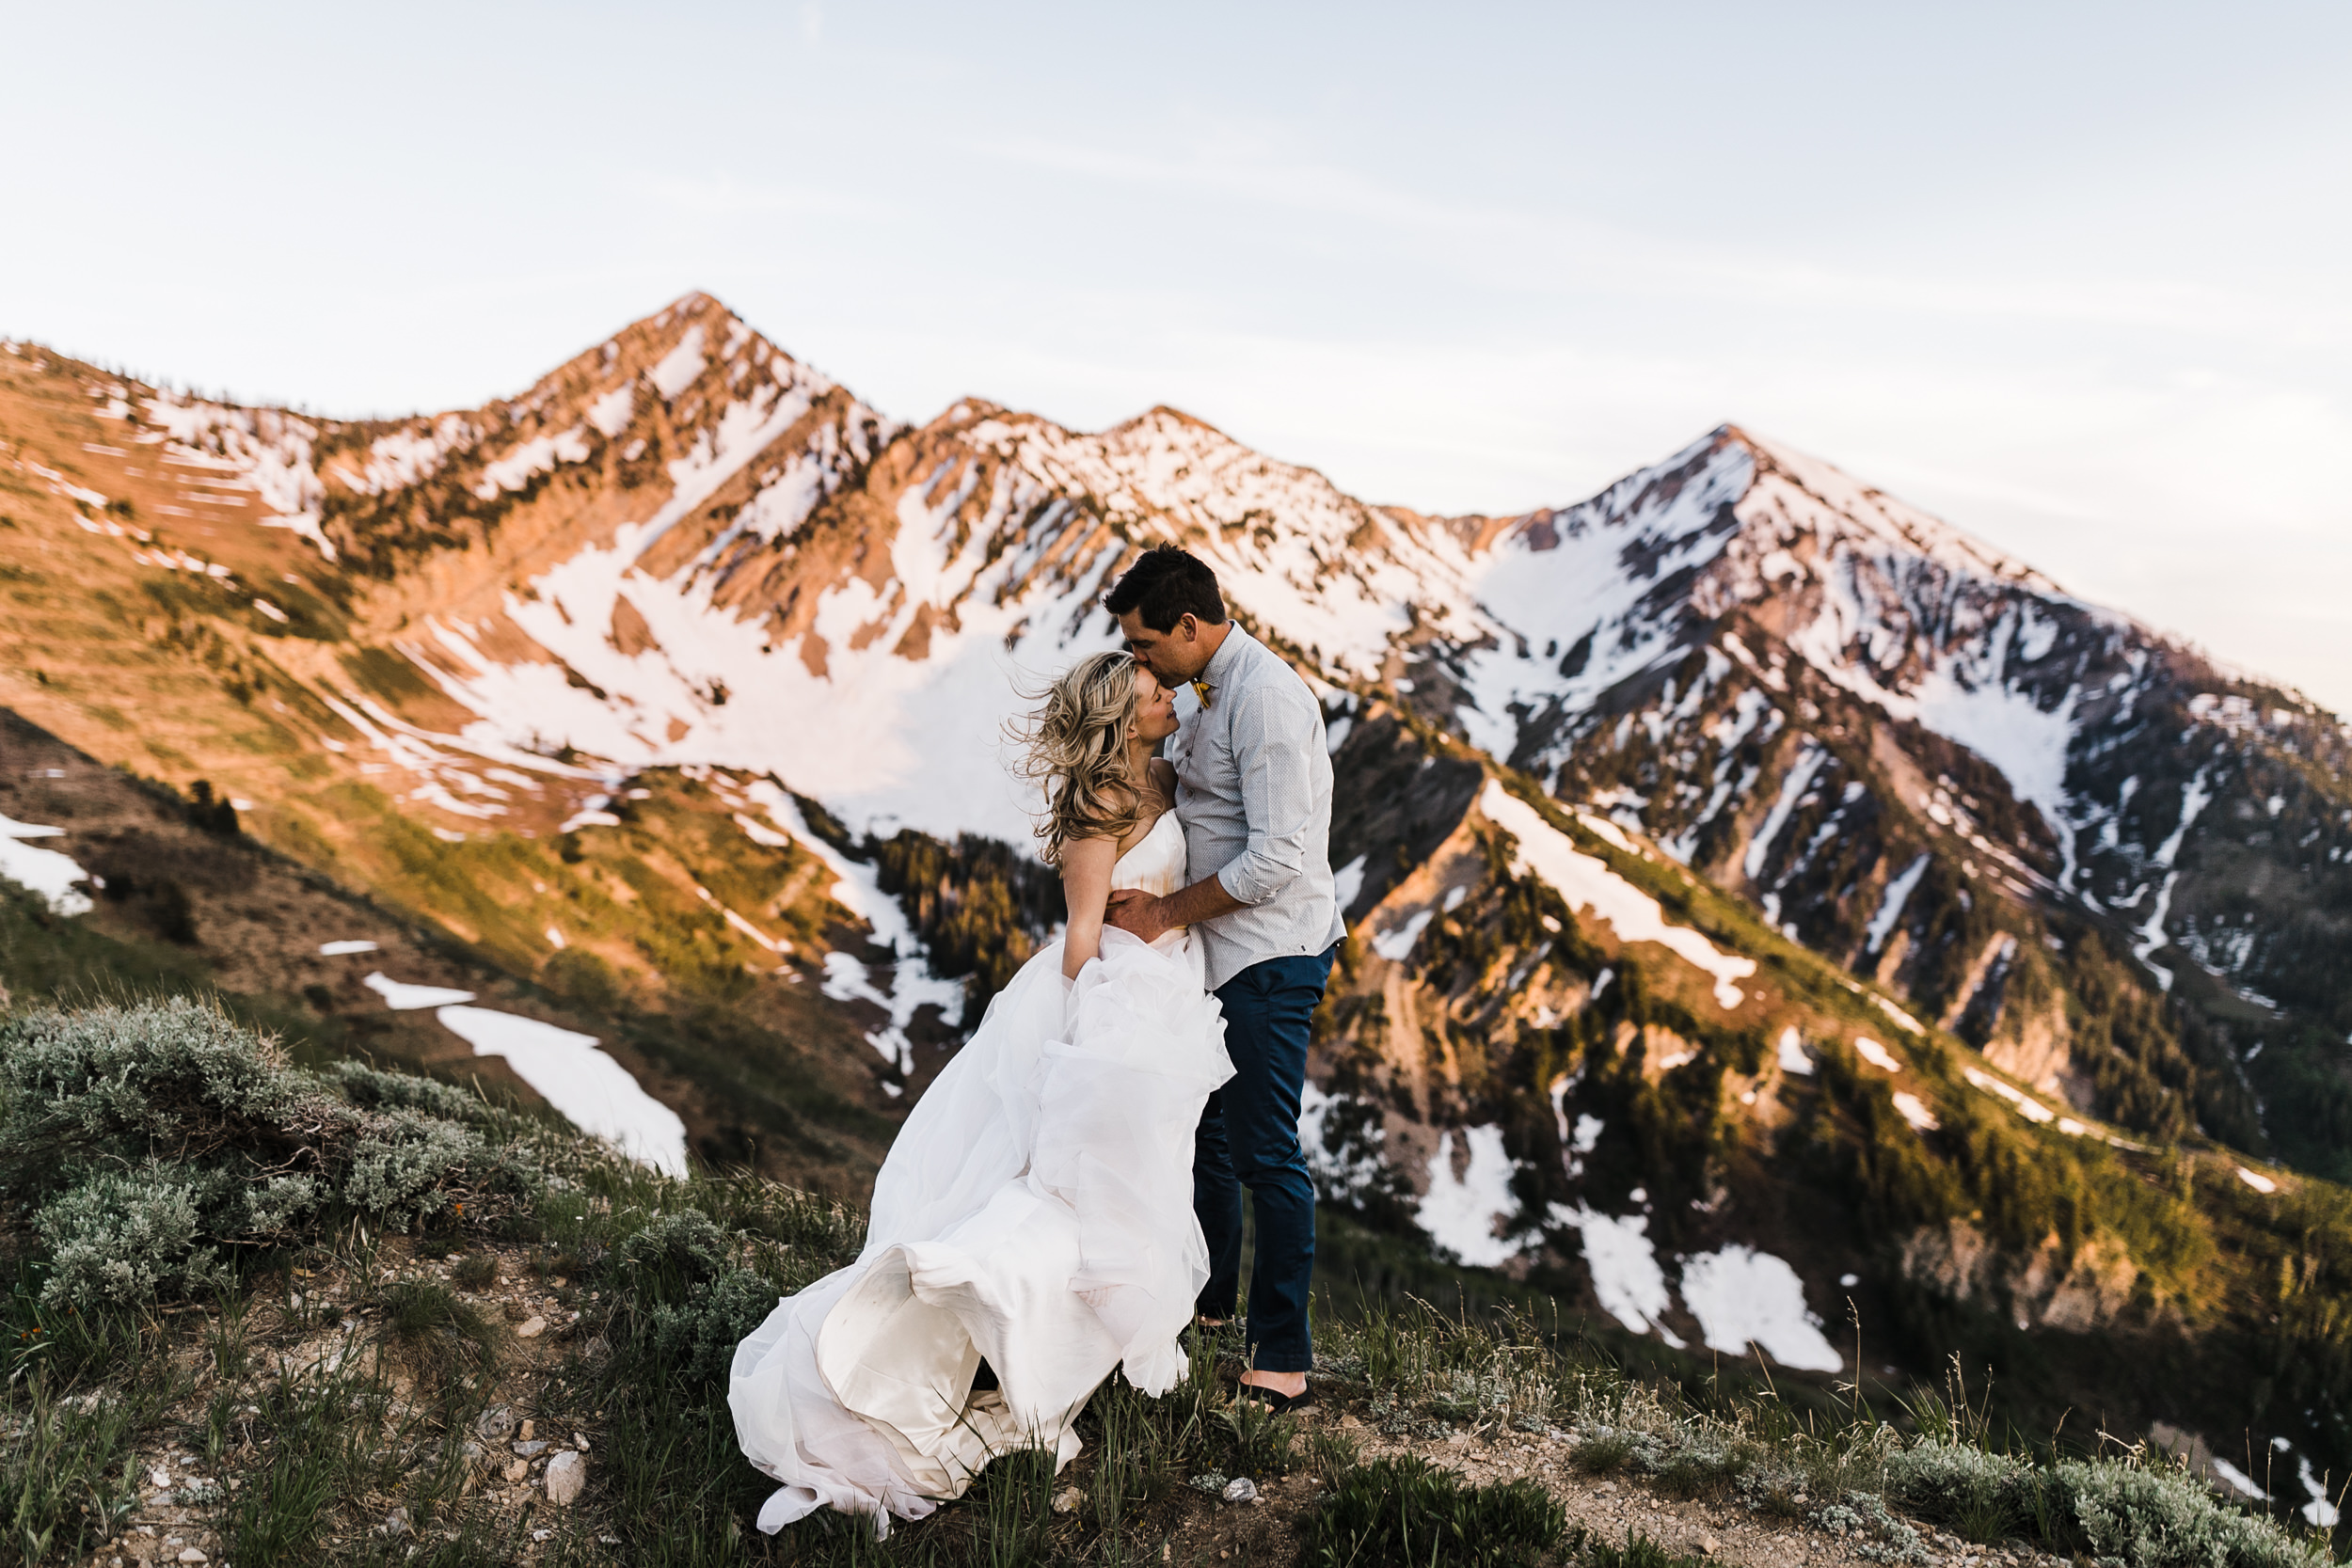 Adventurous Helicopter Elopement Bridal Portraits with Caroline Gleich and Rob Lea in the Wasatch Mountains near Salt Lake City, Utah